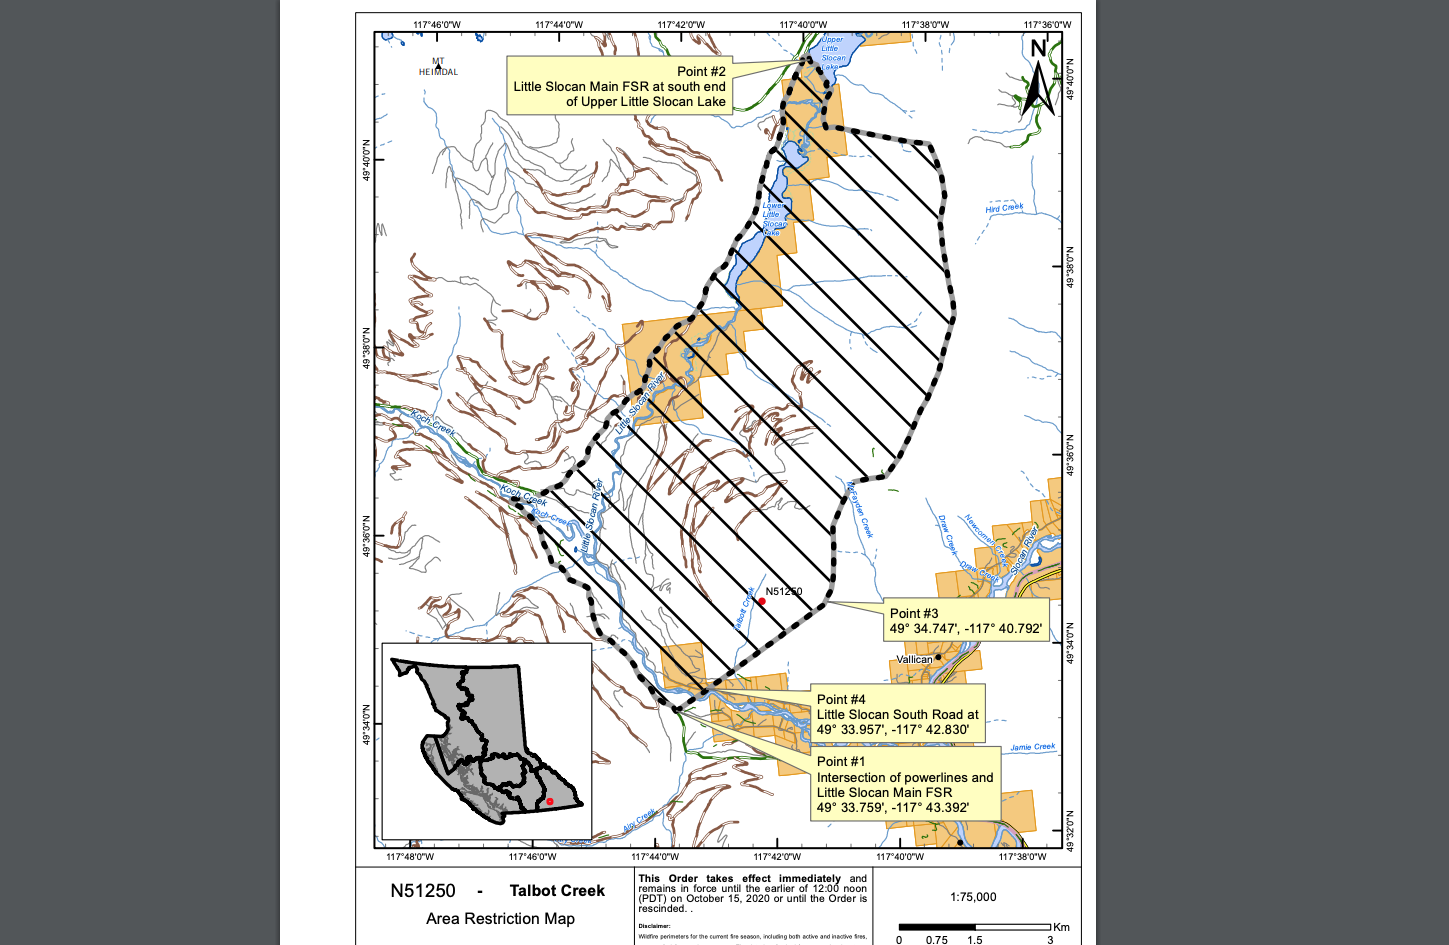 Area restriction in effect for Little Slocan area due to Talbot Creek wildfire